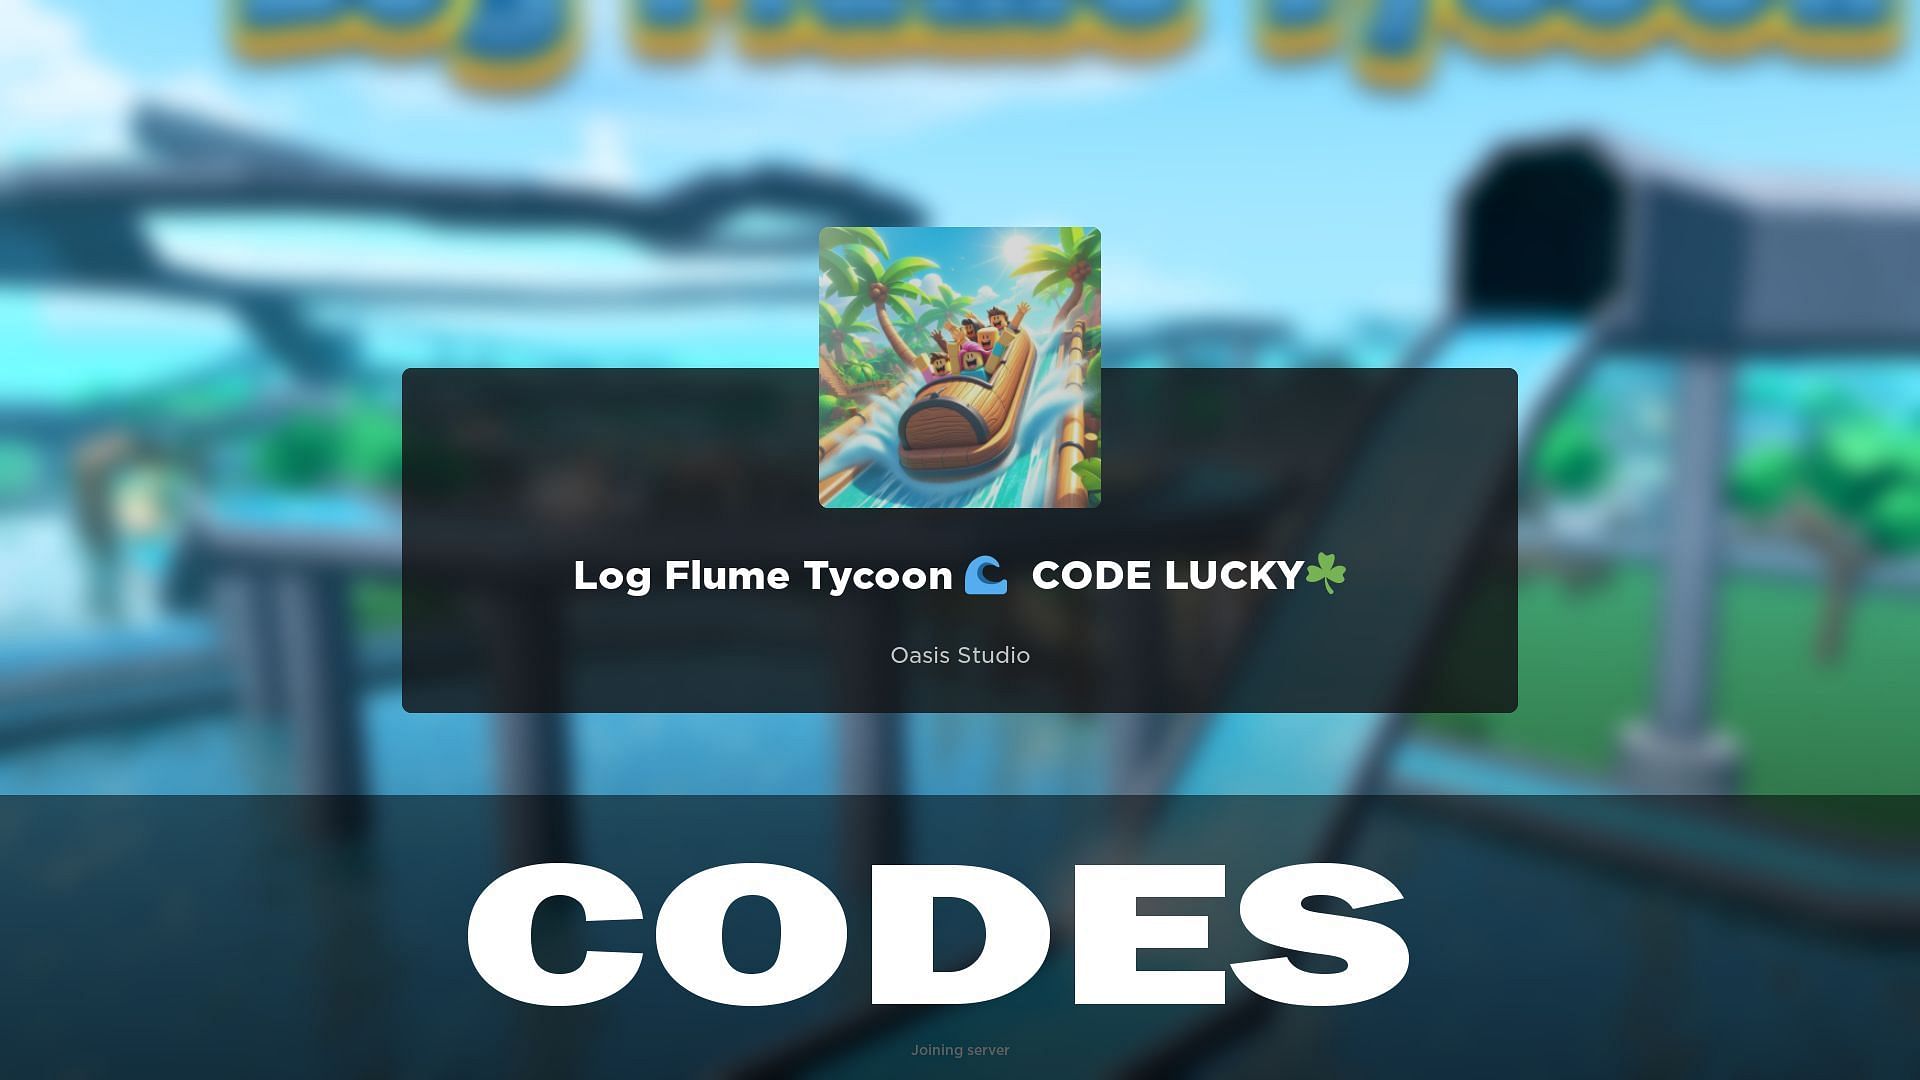 Redeem codes for Log Flume Tycoon